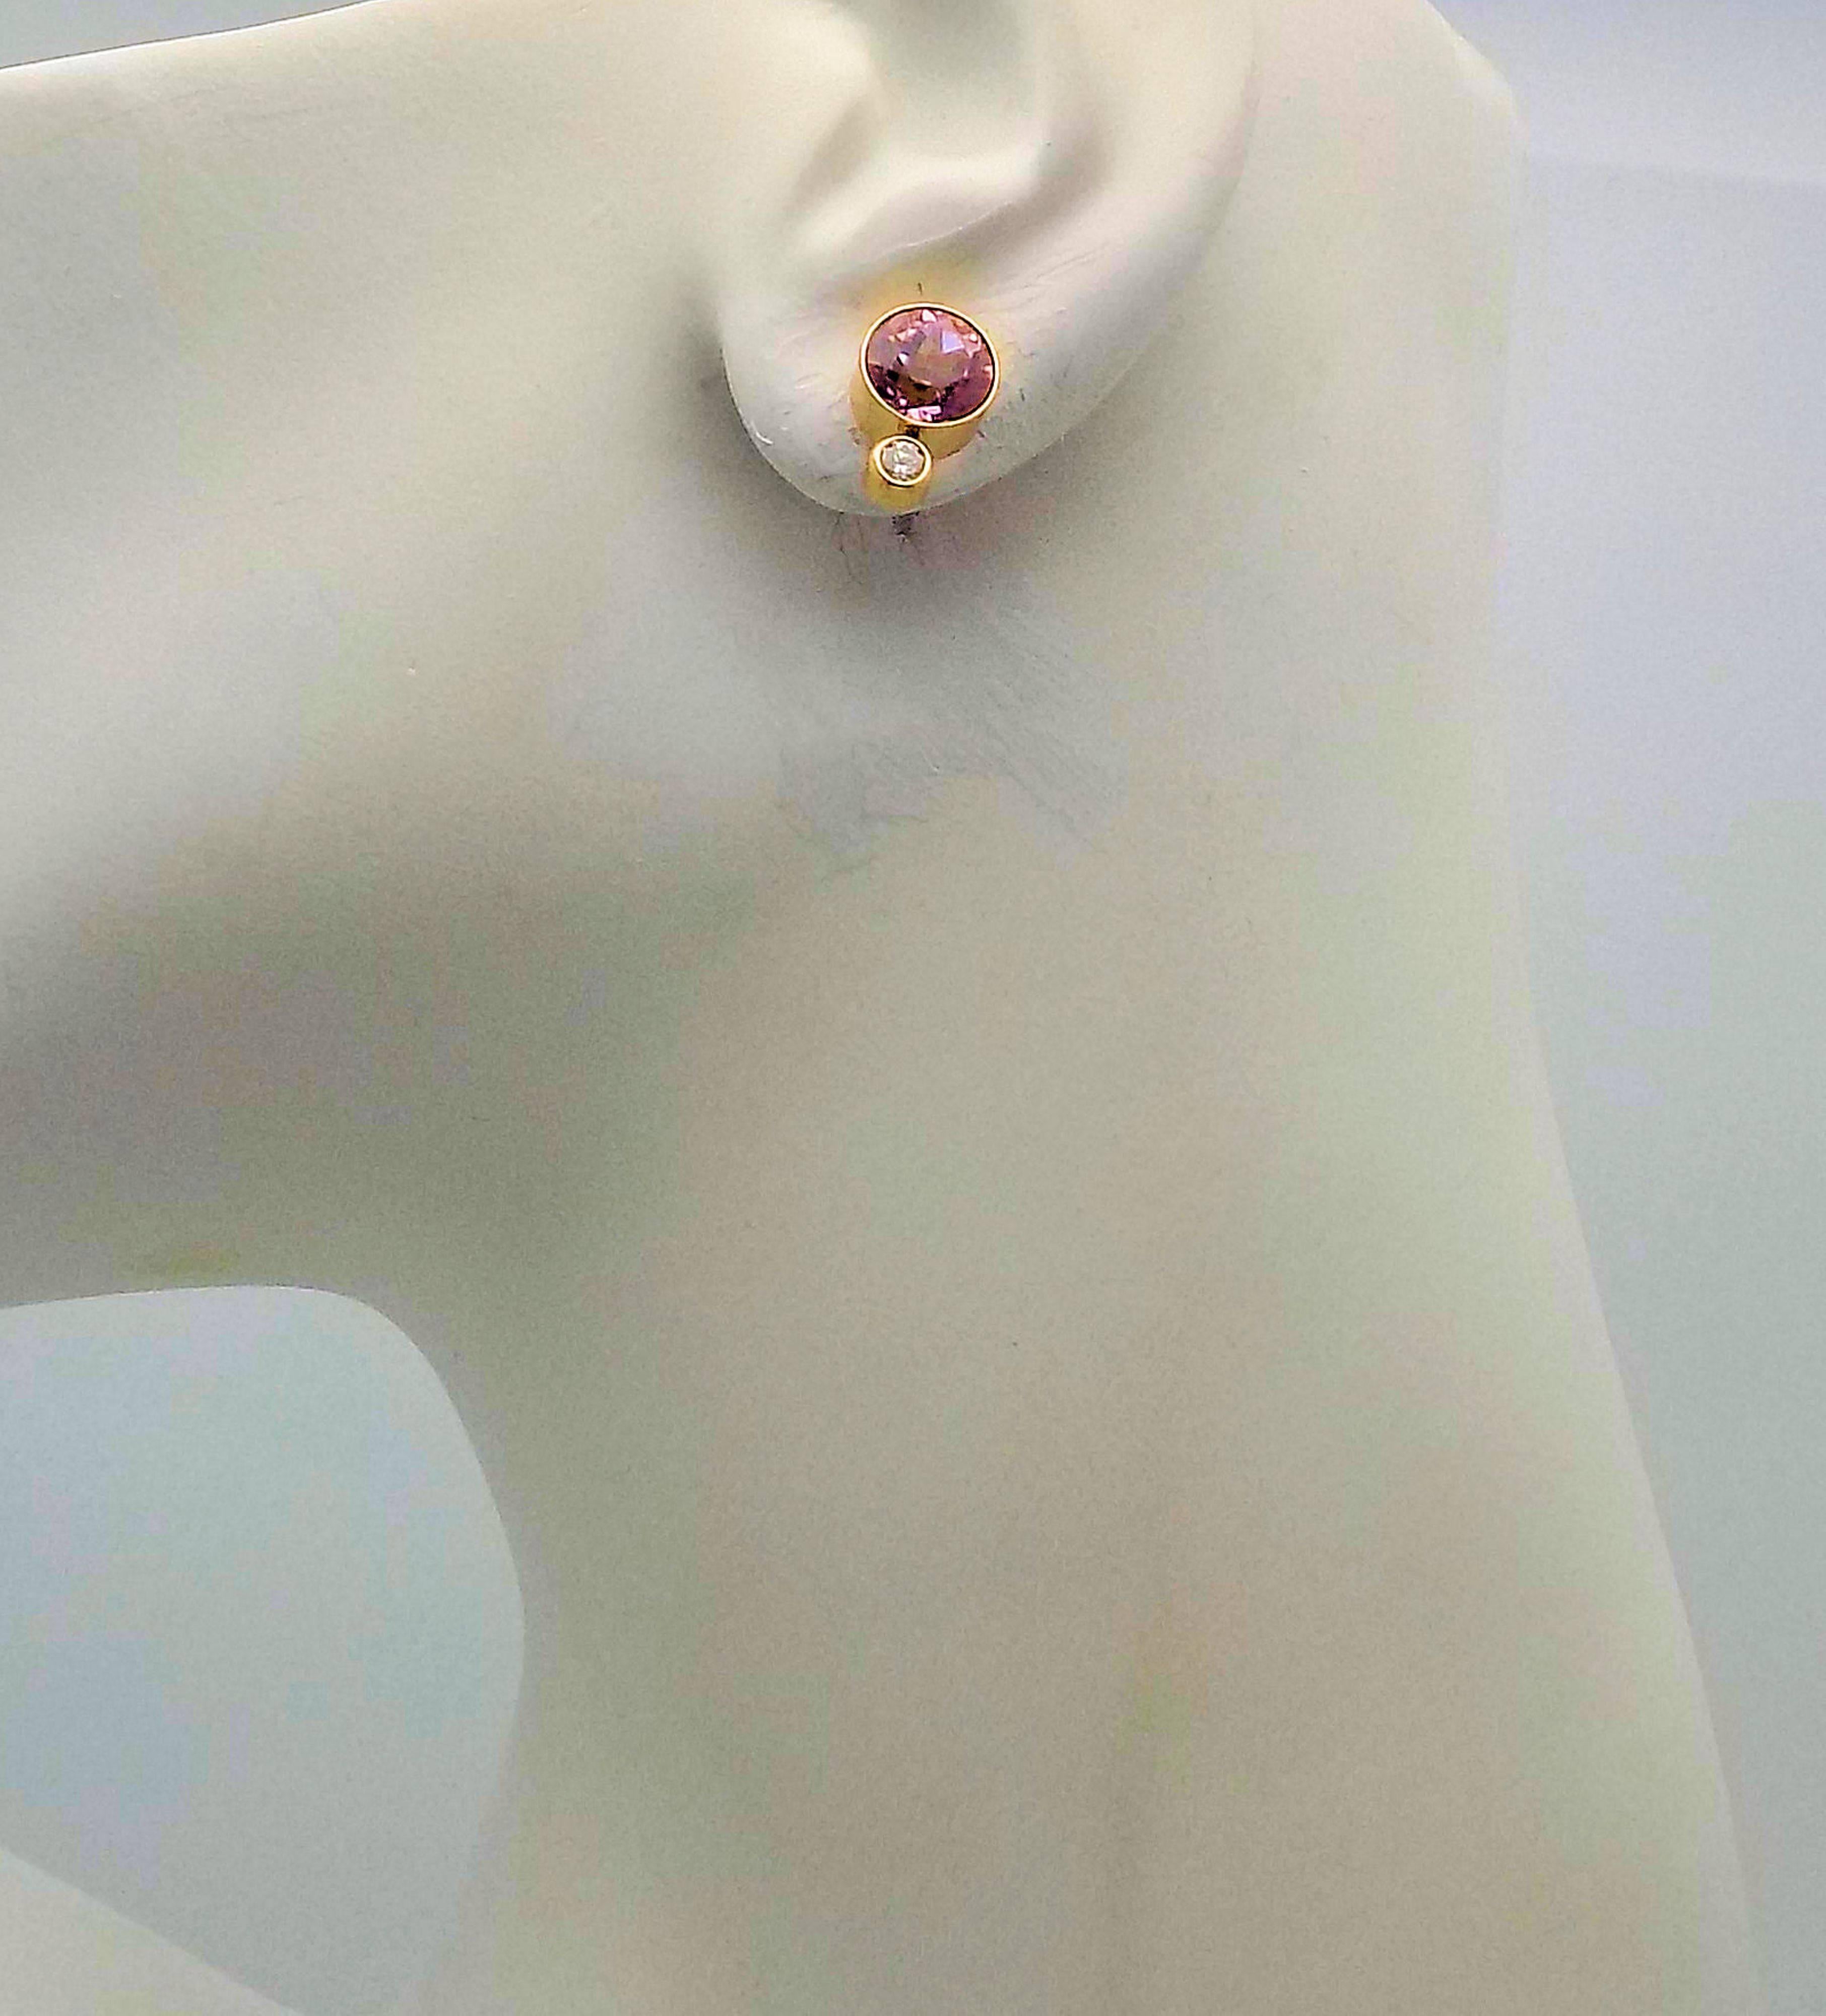 Classic Design to these Beautiful Stud Earrings in 14 Karat Yellow Gold  Featuring 2 Round  Diamond Cut Kunzites 5.75 Carat Total Weight, Fine Color, in Bezel Setting; 2 Round Brilliant Diamonds 0.20 Carat Total Weight VS, H; 3 DWT or 4.67 Grams.